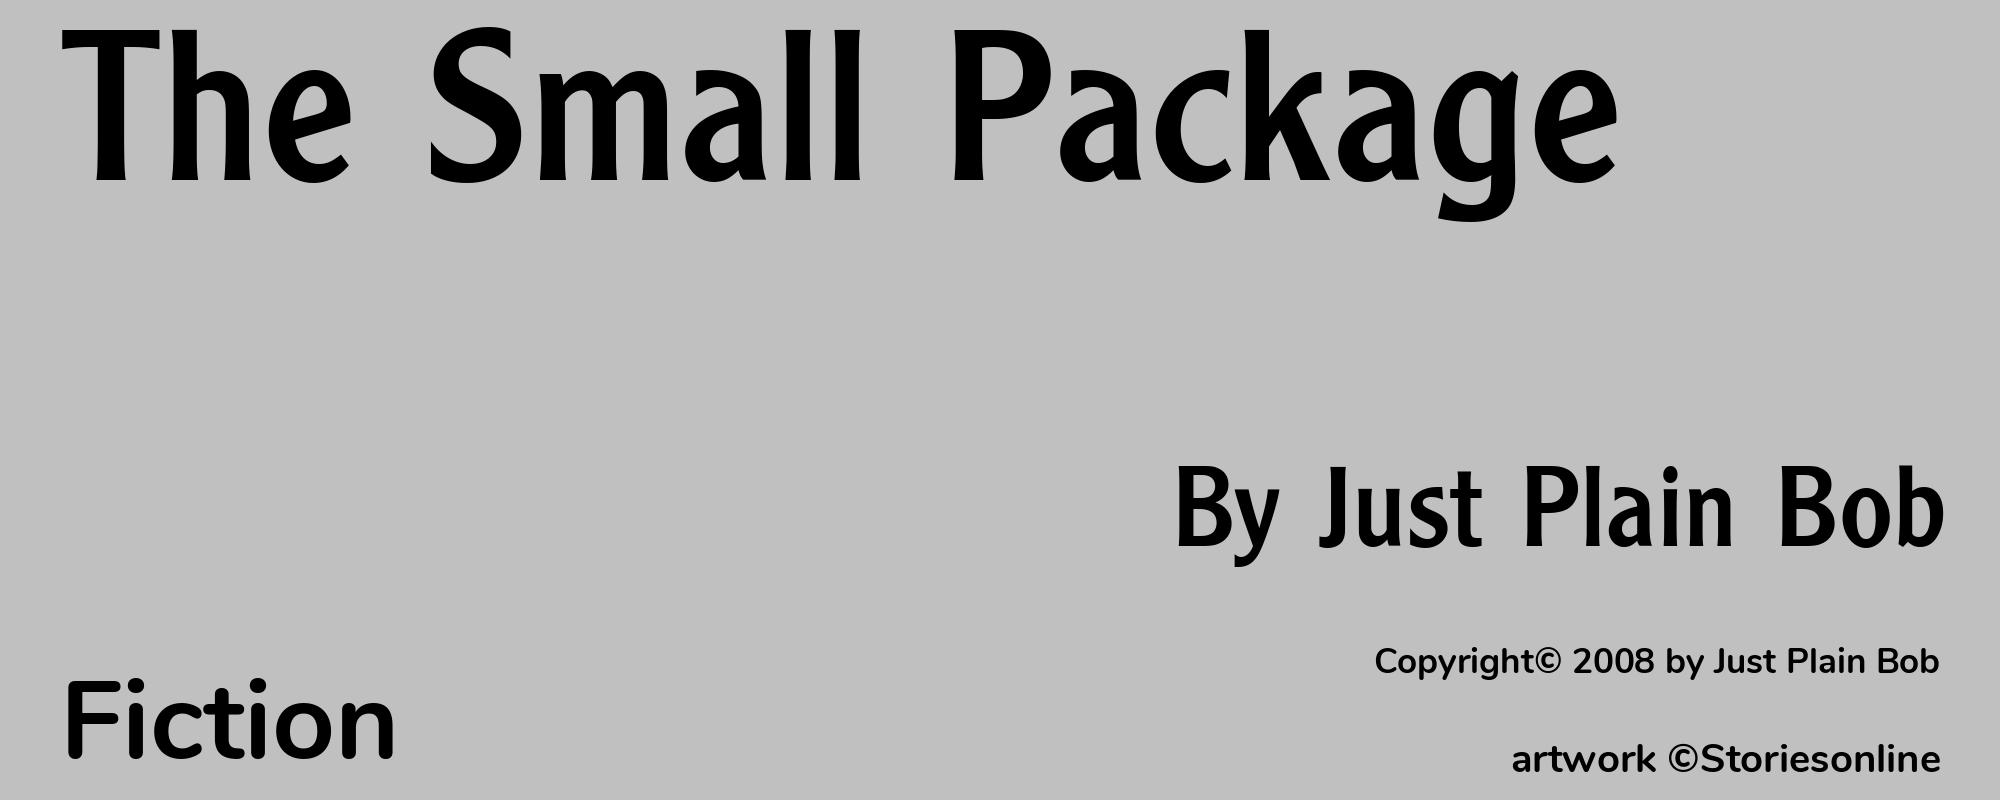 The Small Package - Cover